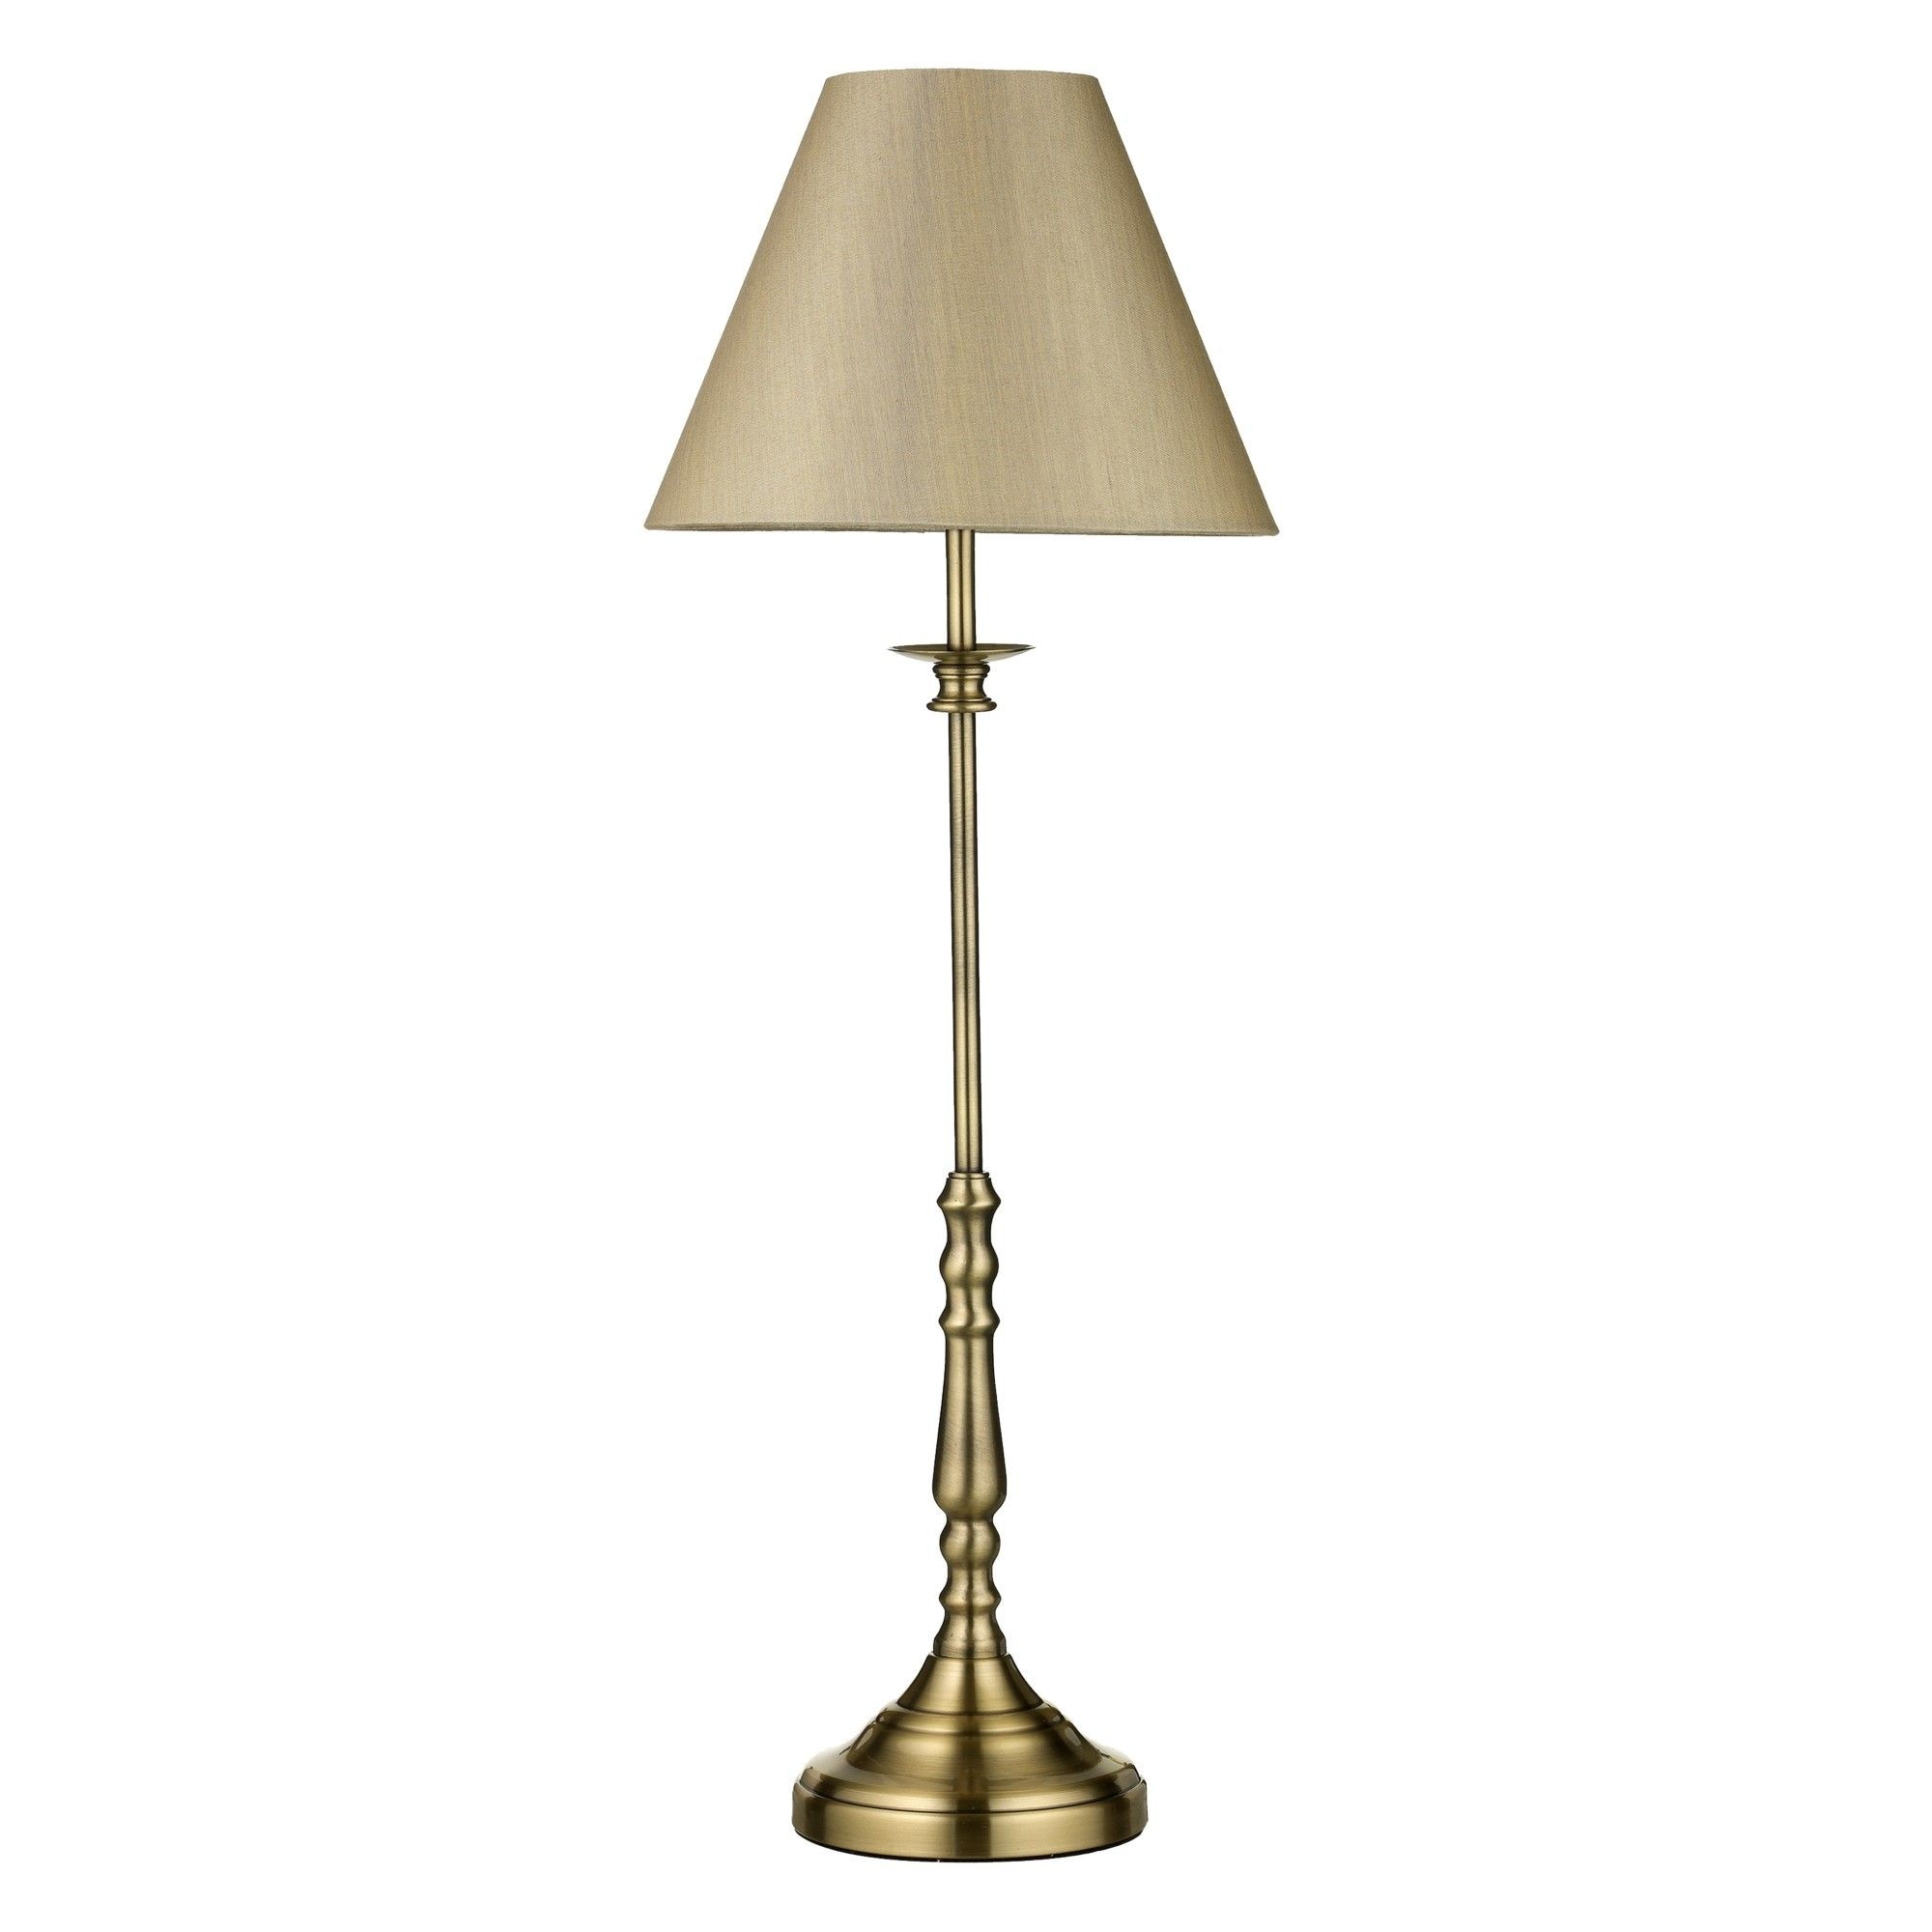 Antique brass table lamp i found a lot of nice